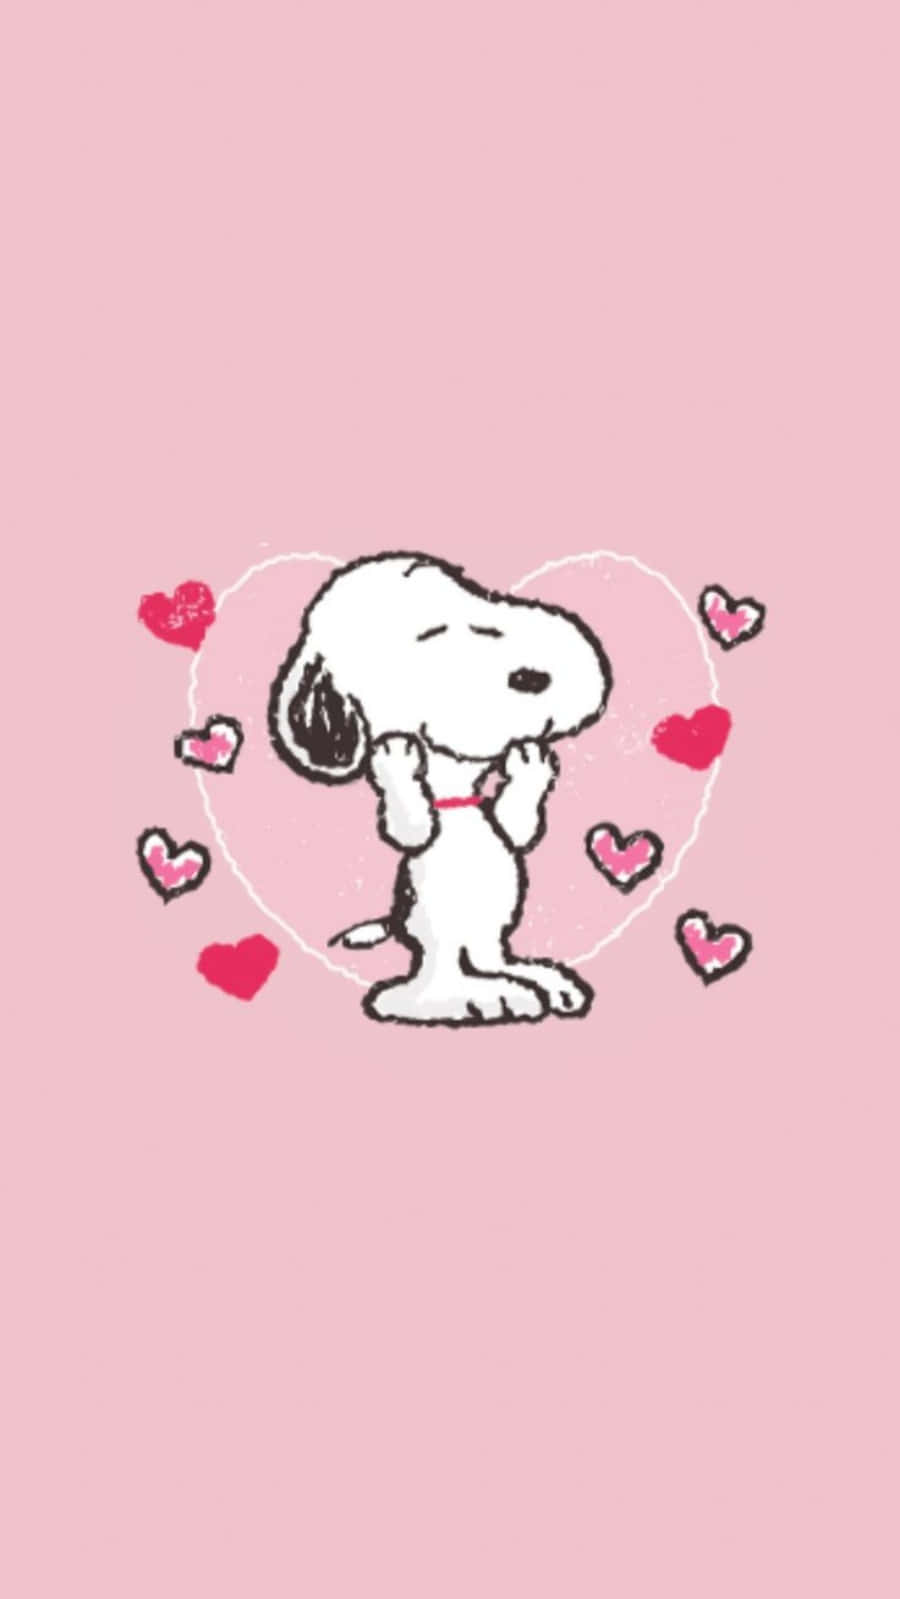 Snoopy Sends His Love This Valentine's Day Wallpaper